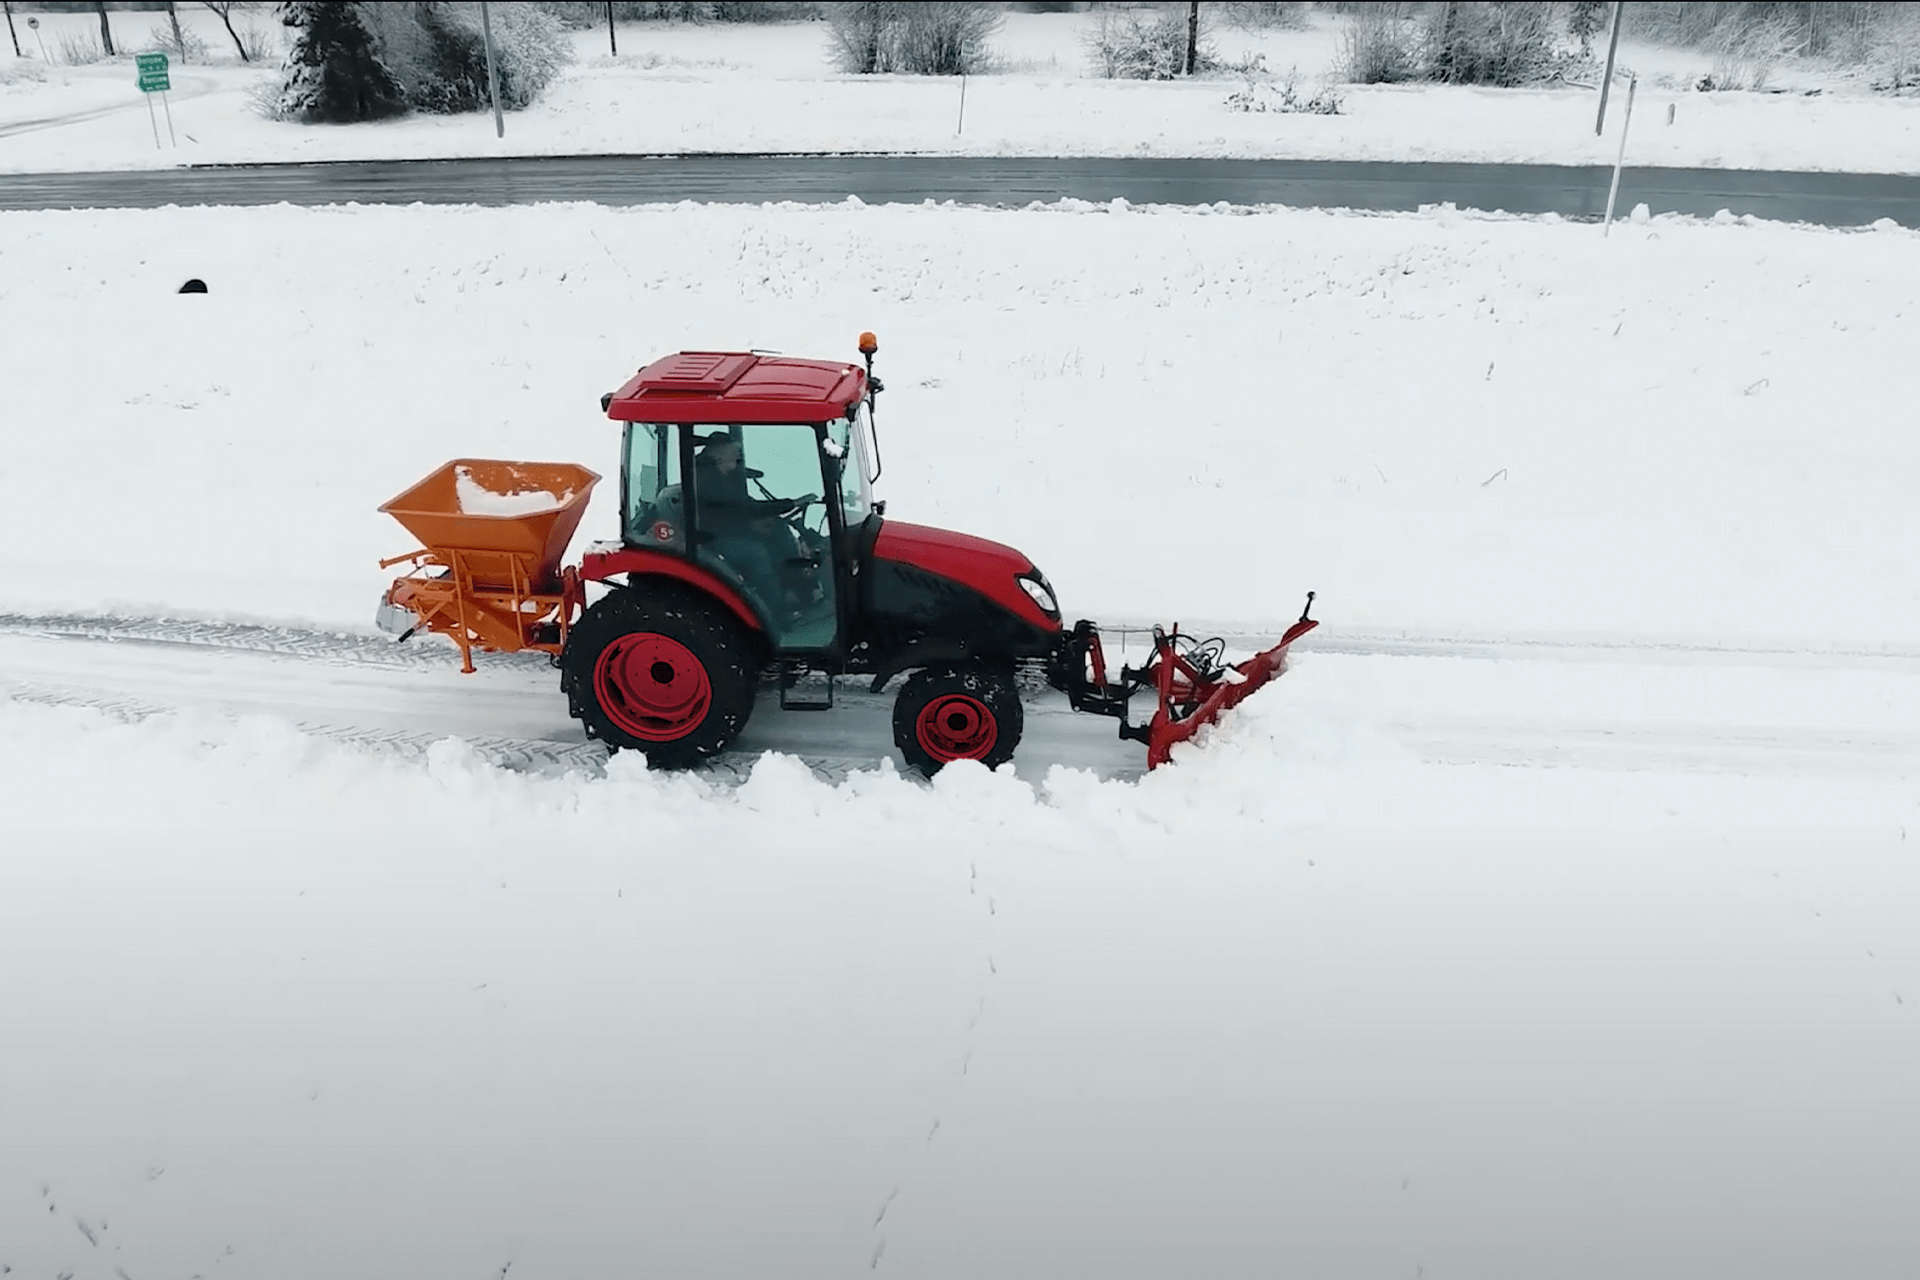 An introduction to snow removal attachments